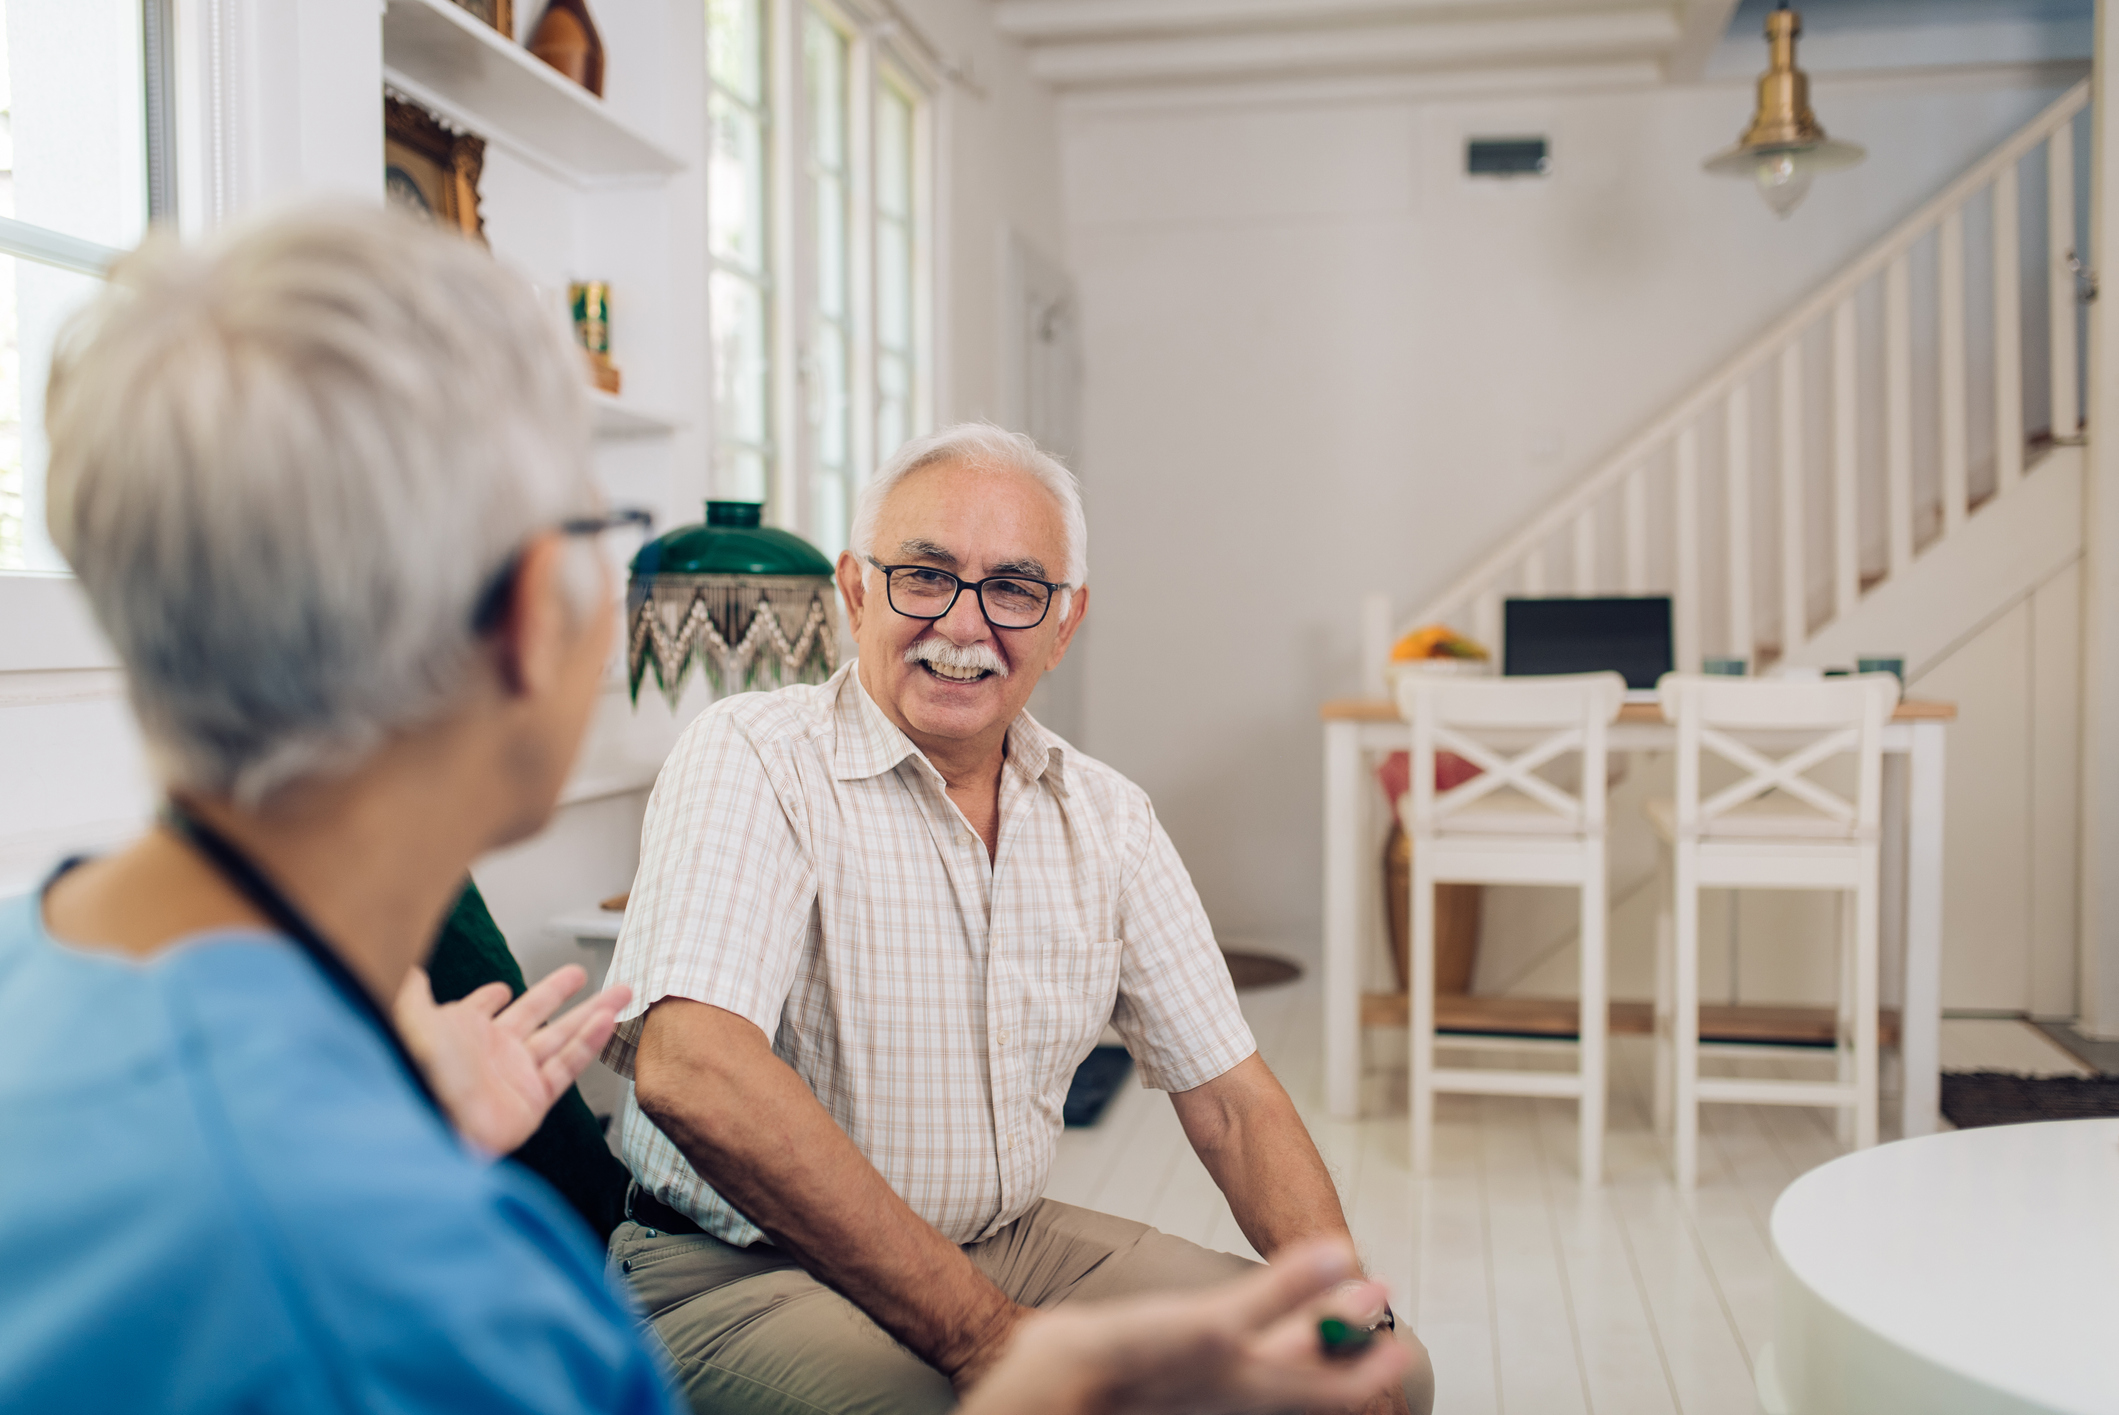 An in-home care consultation can help determine the ideal senior care solutions for loved ones.